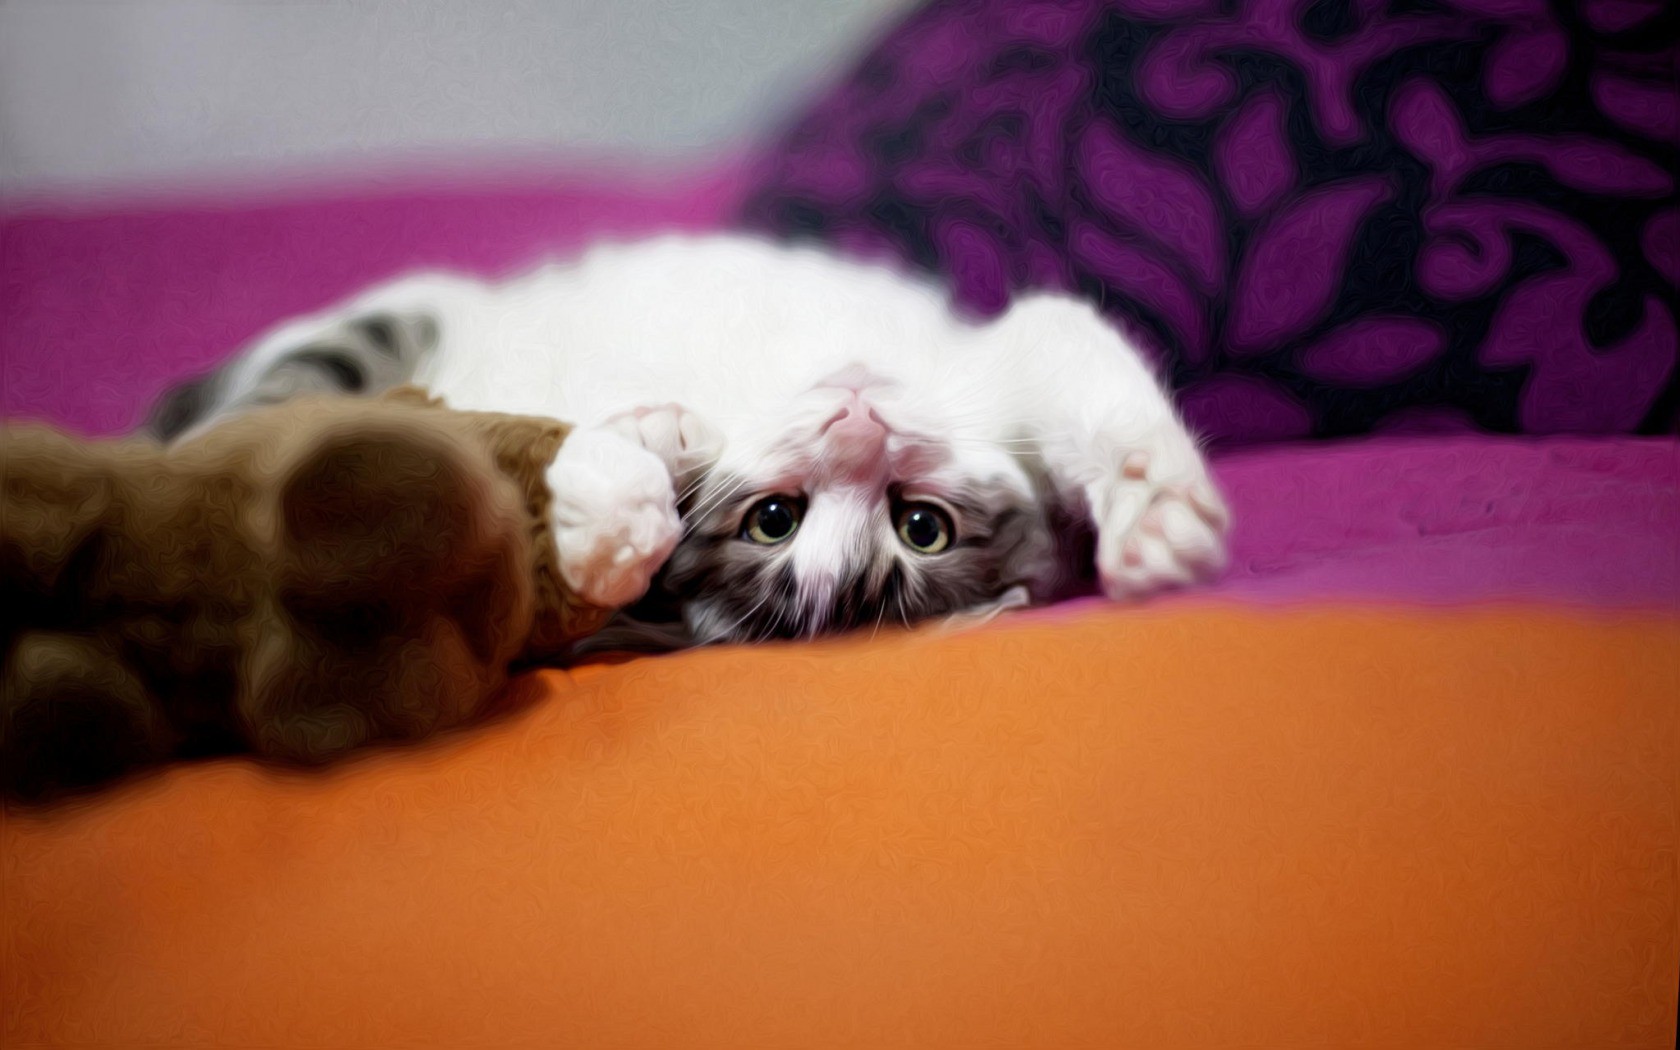 caturday pic of a kitten laying upside down